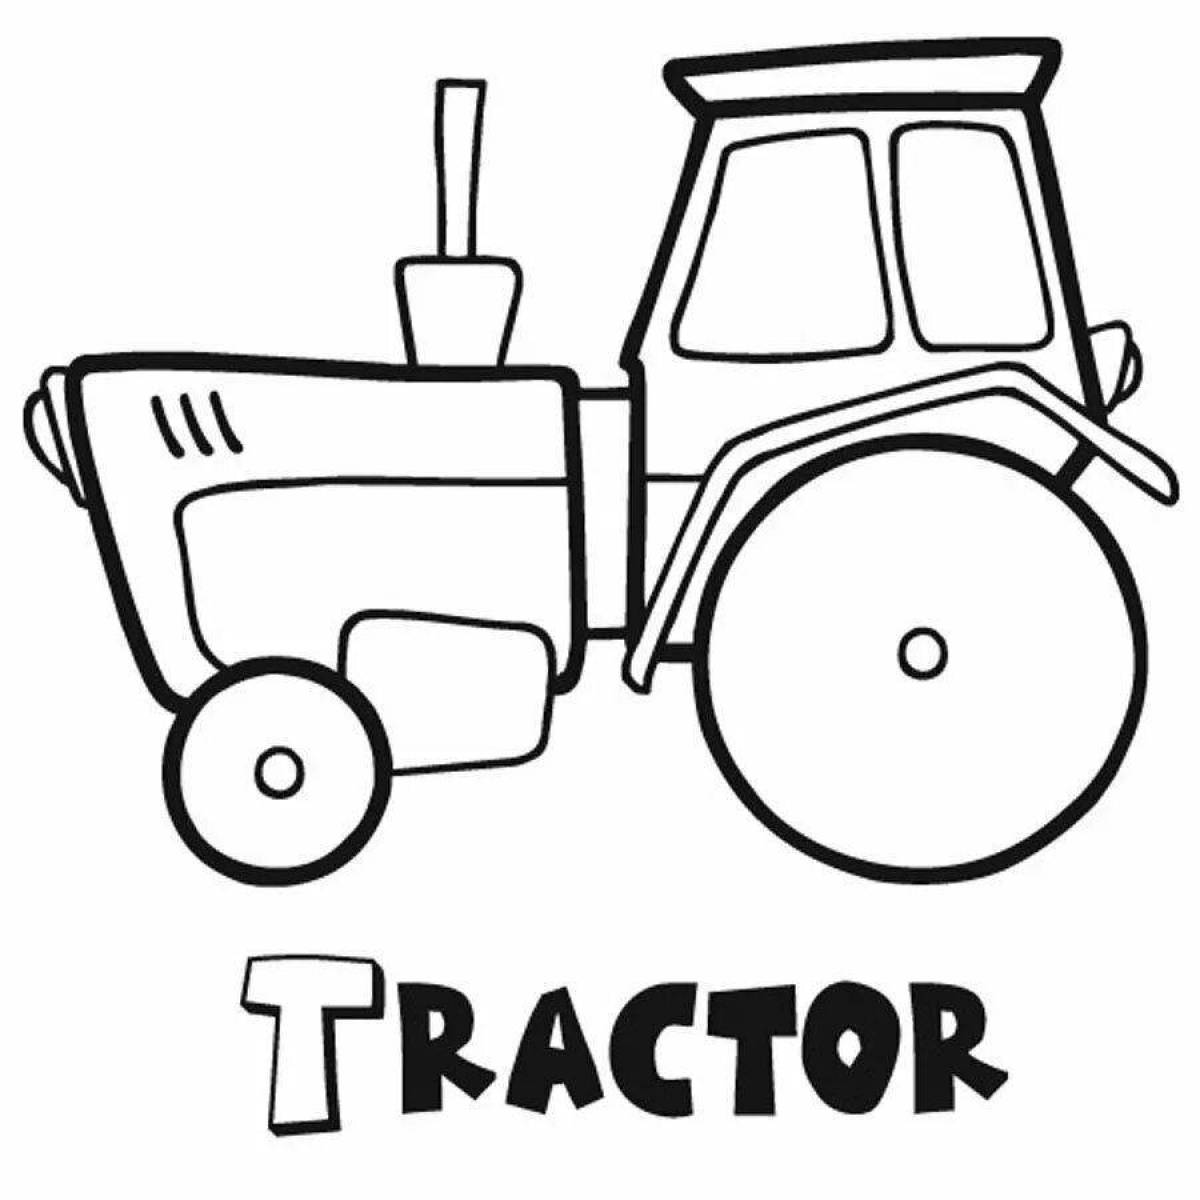 Smart drawing of a tractor